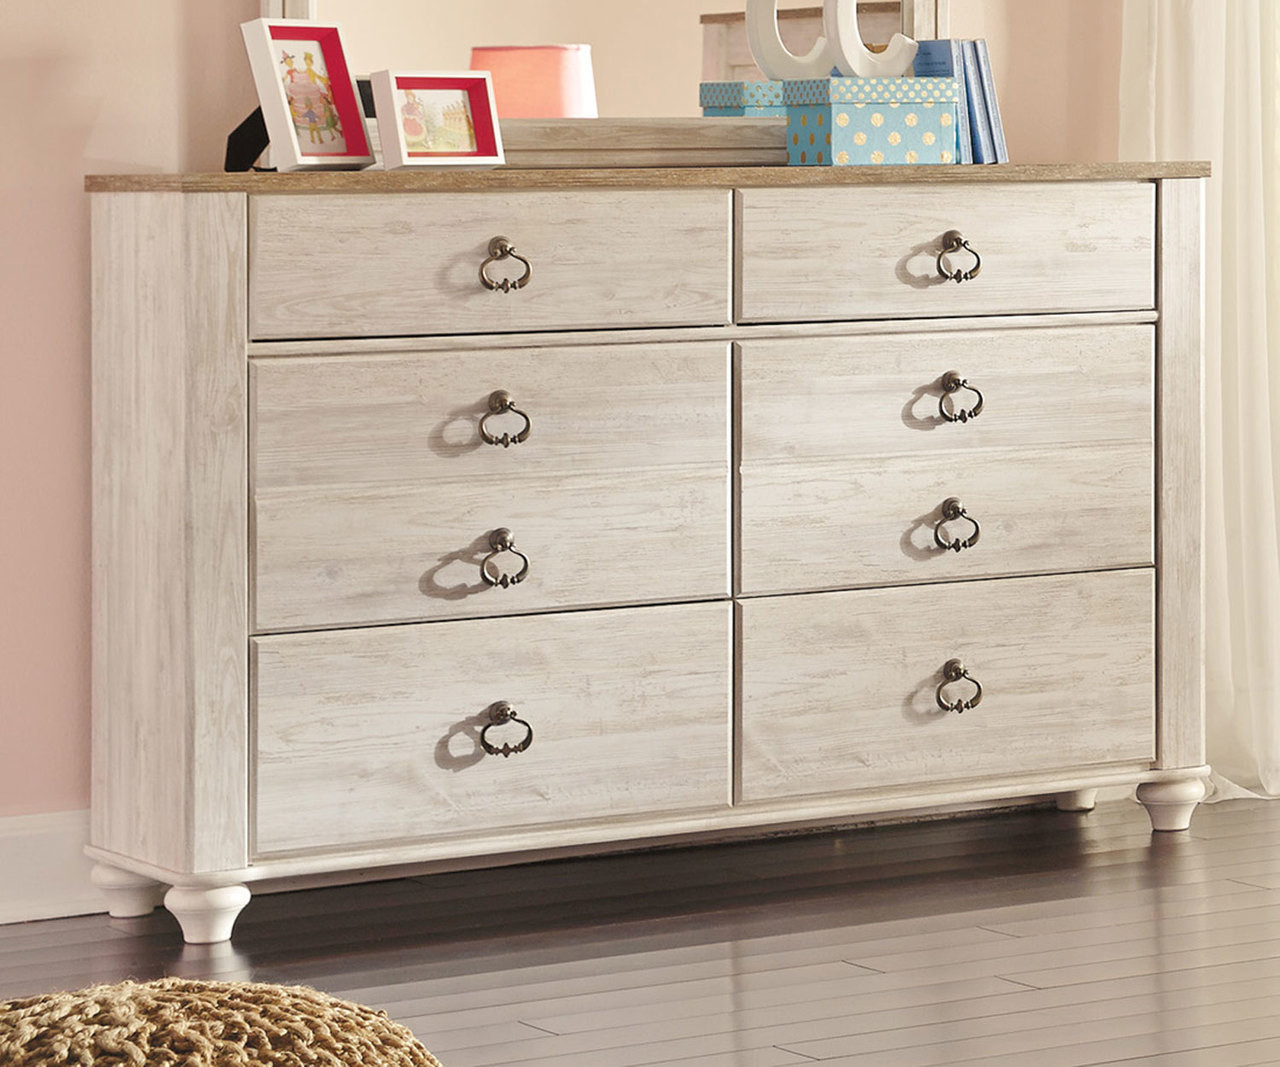 willowton youth dresser